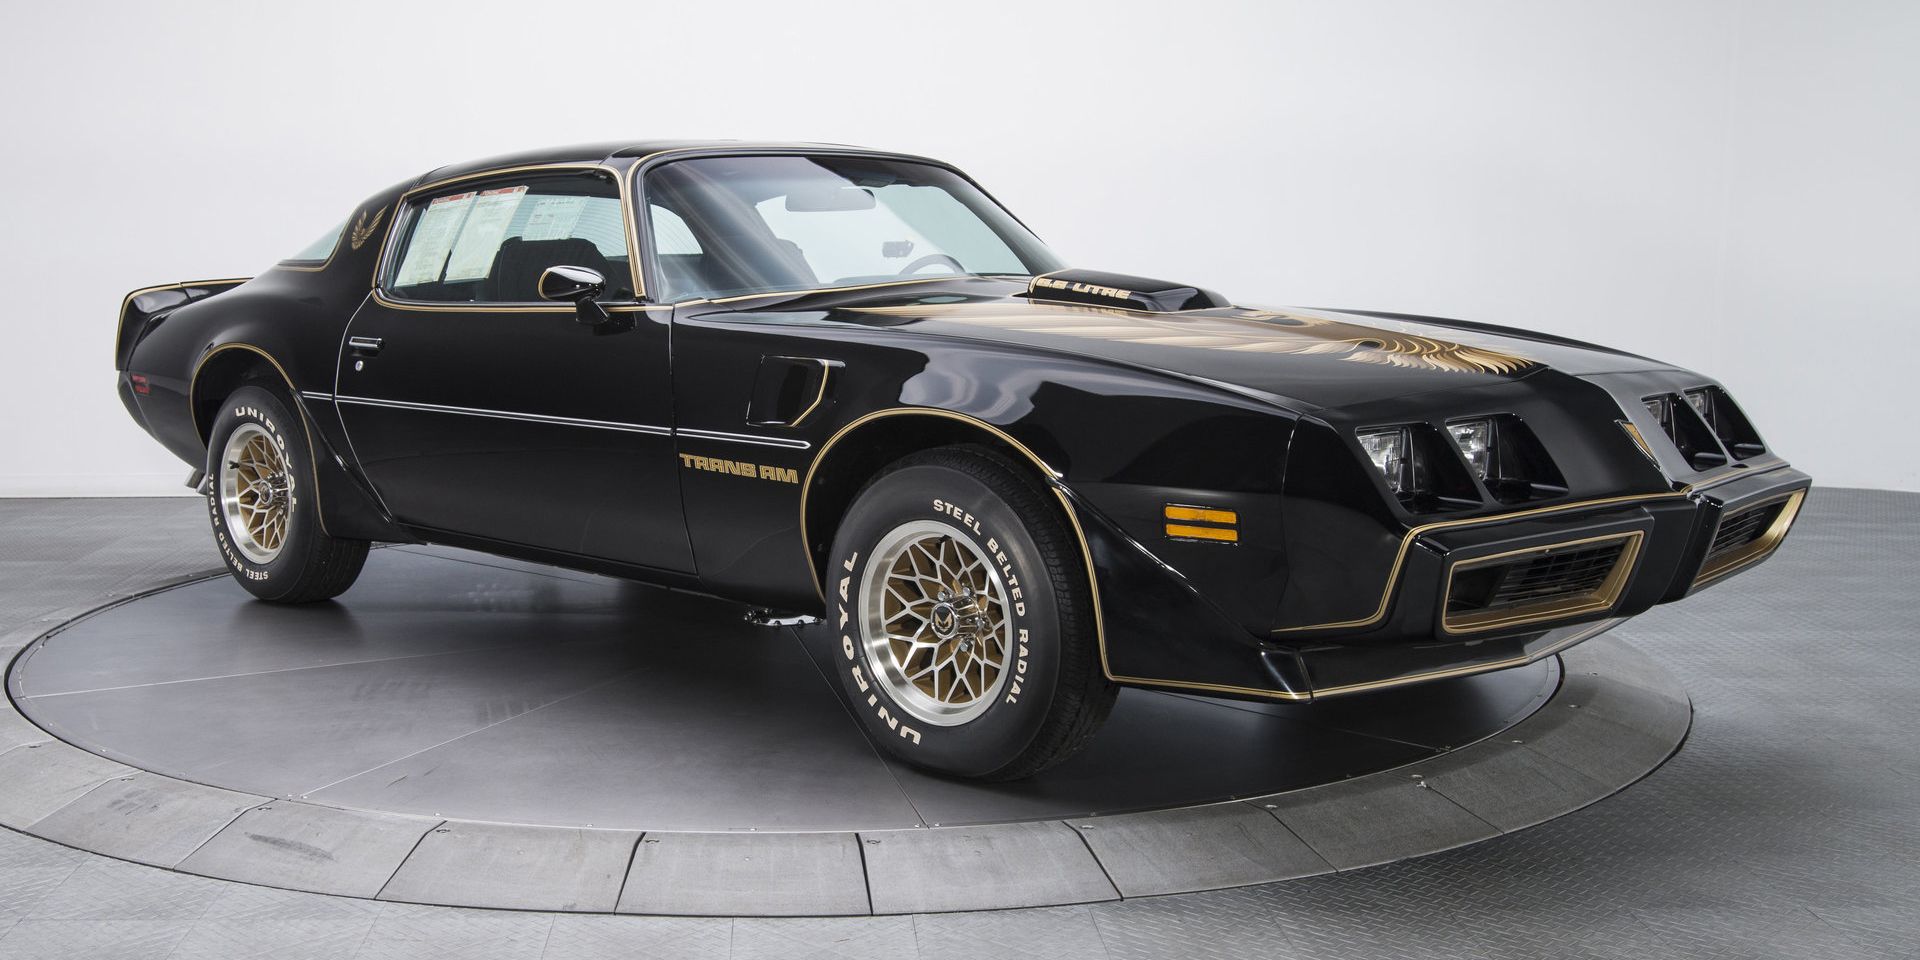 This Brand-New 1979 Pontiac Trans Am Can Be Yours for $160,000